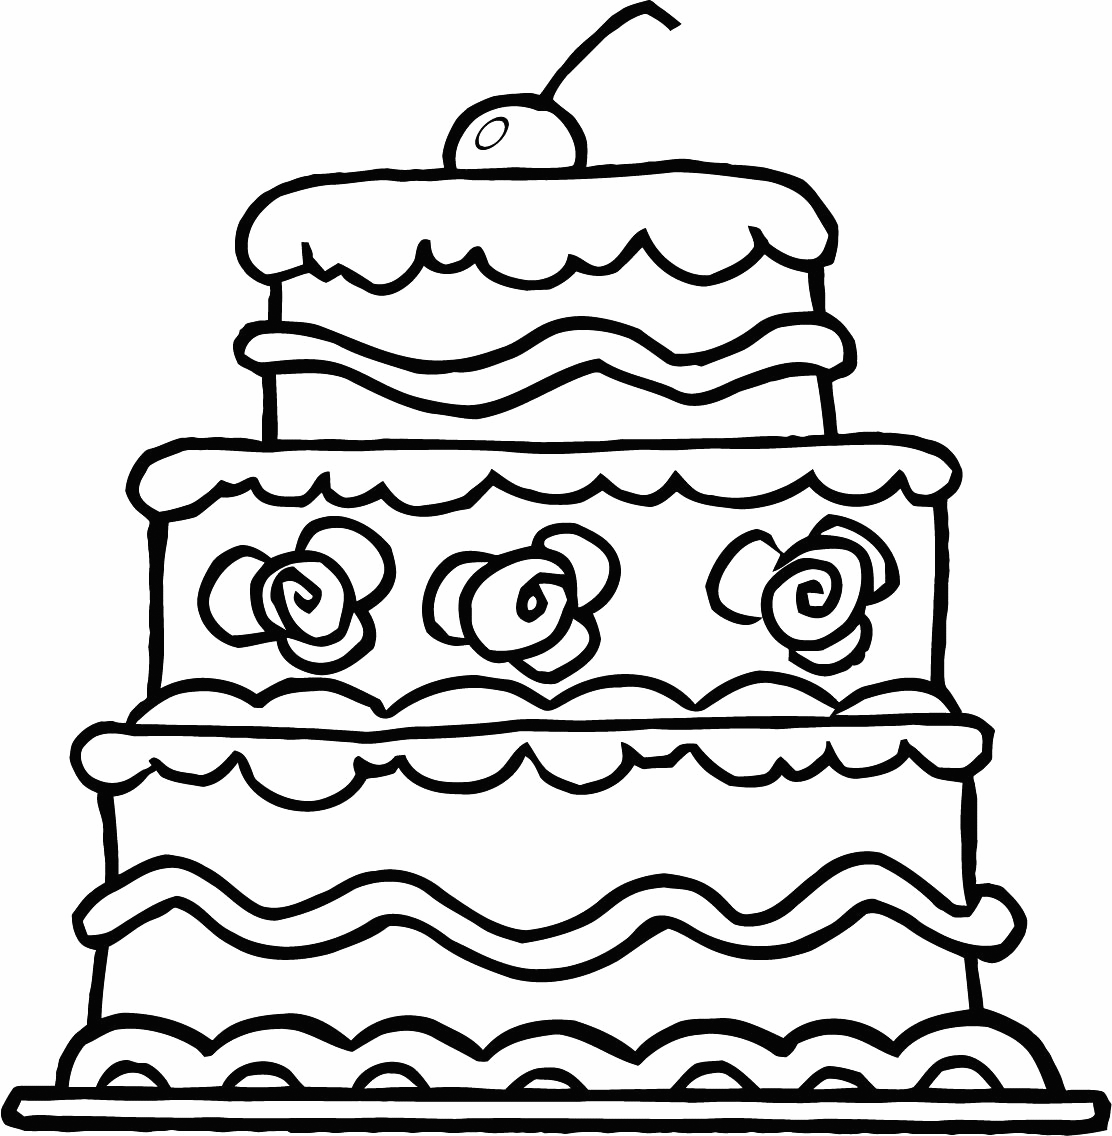 Easy Wedding Cake Coloring Page